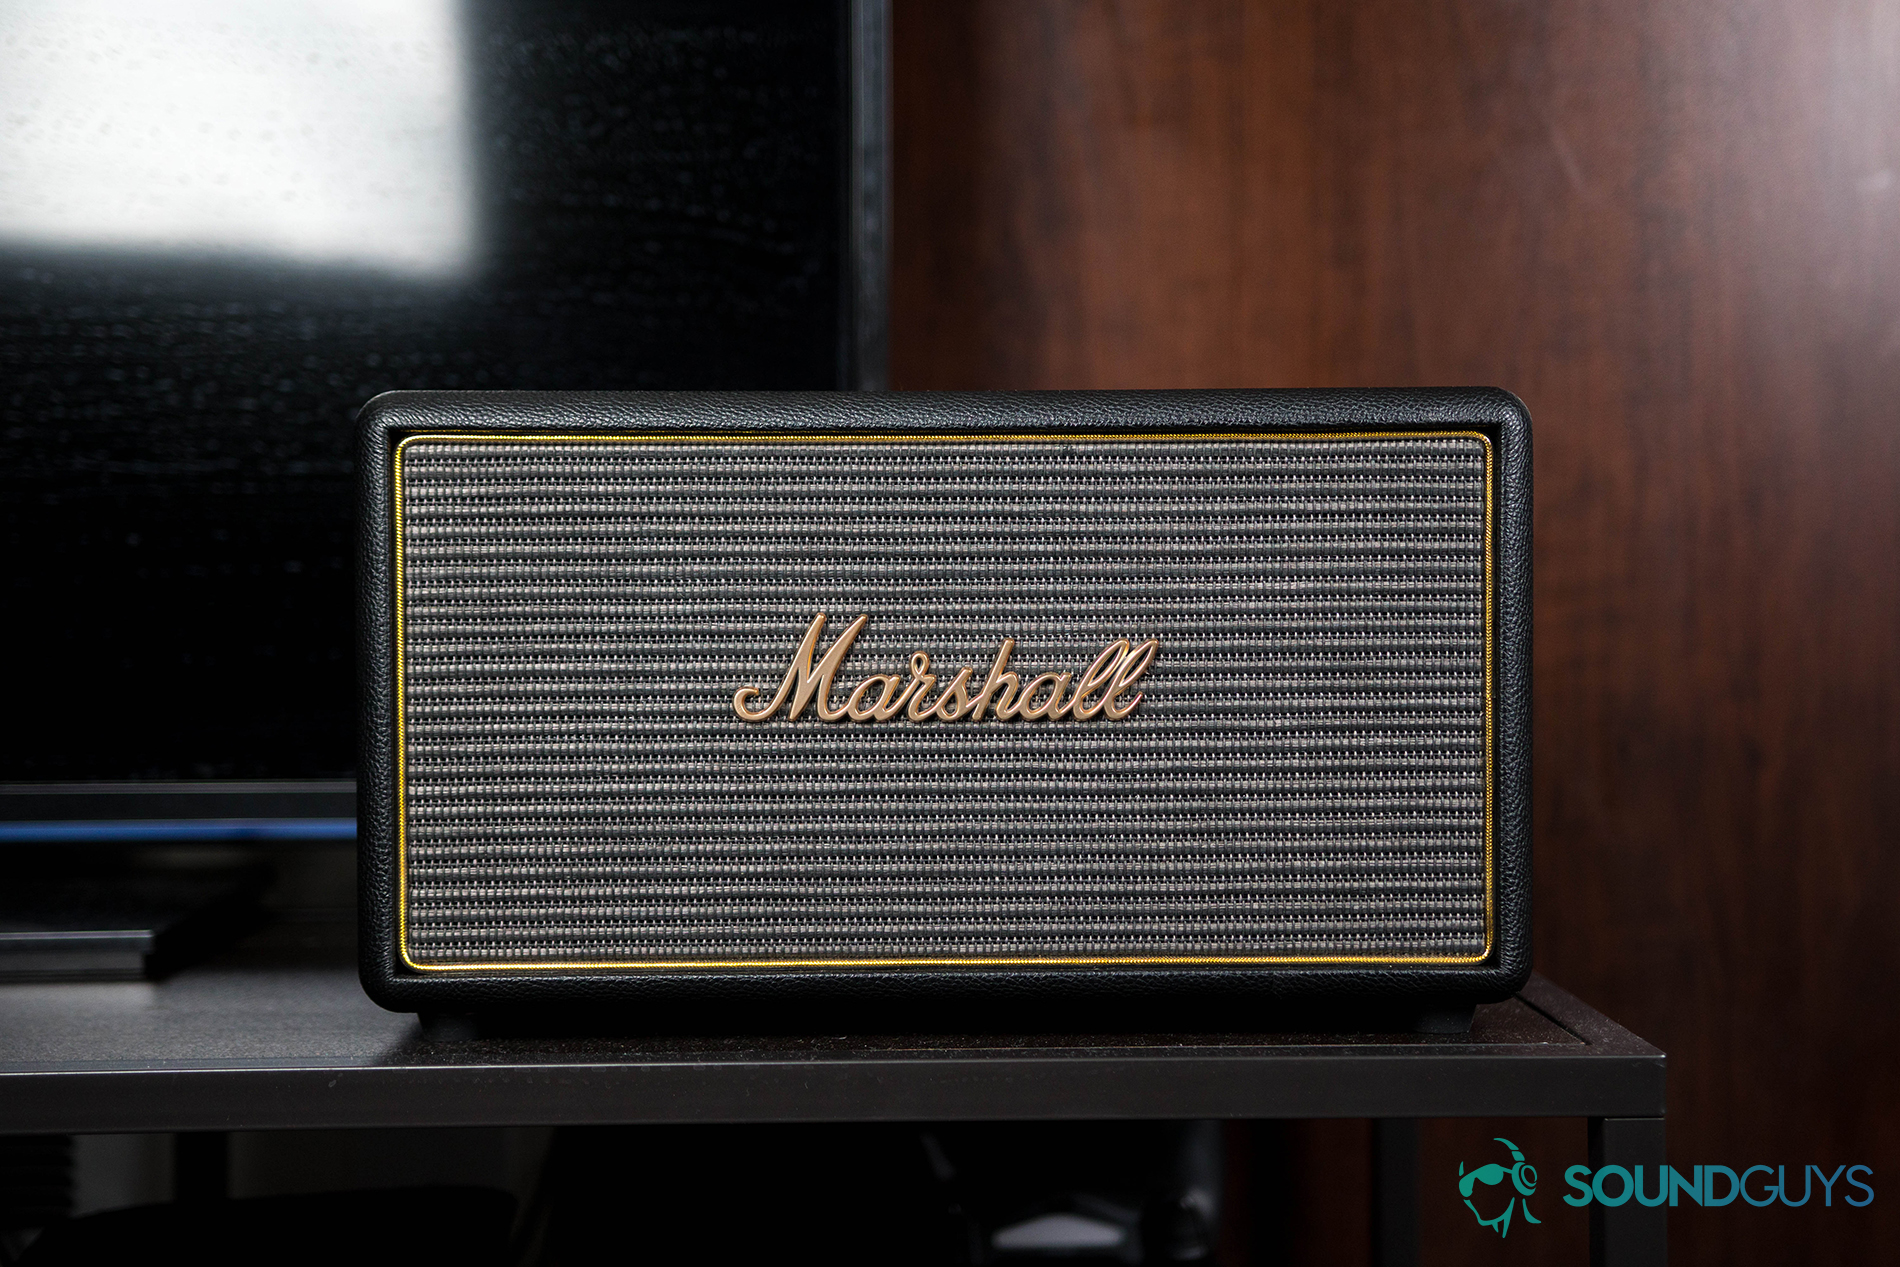 A picture of the Marshall Stanmore speaker against a dark wood wall.